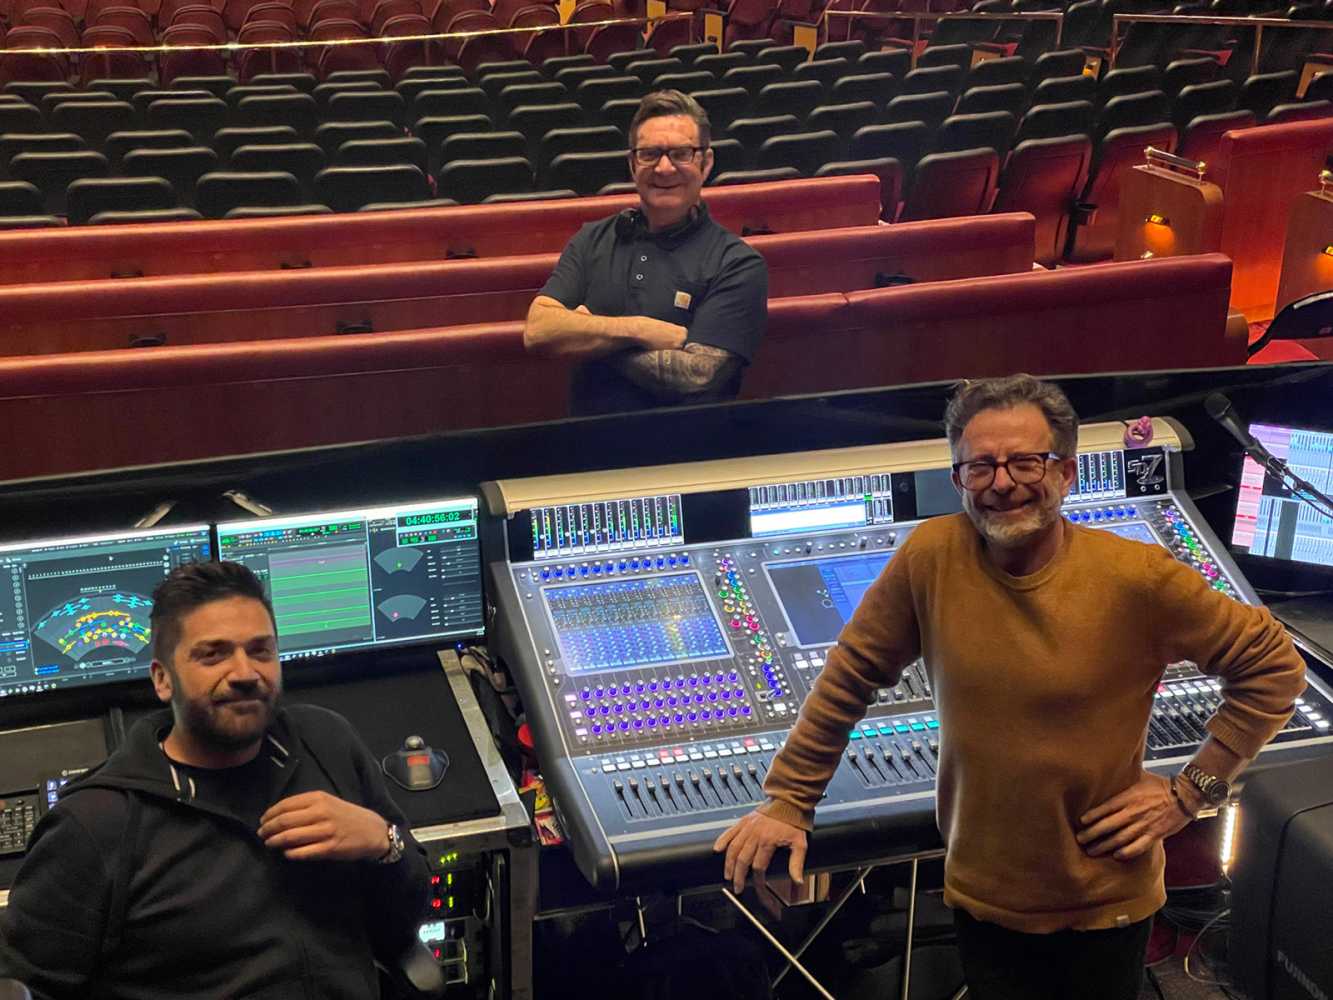 System engineer Johnny Keirle, production manager Paul English and FOH engineer Dave Bracey